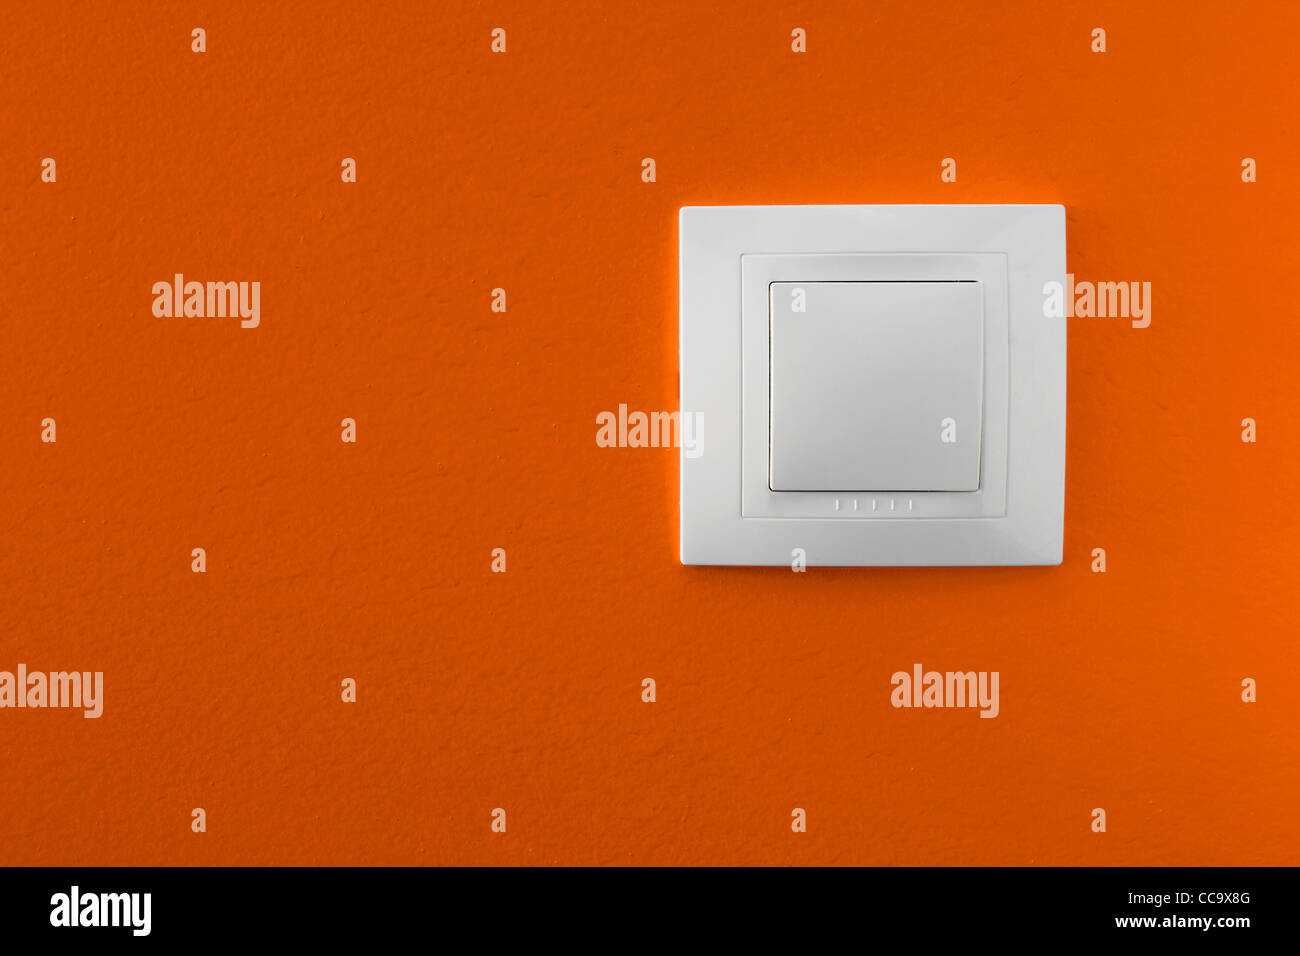 Simple light switch on a orange wall Stock Photo